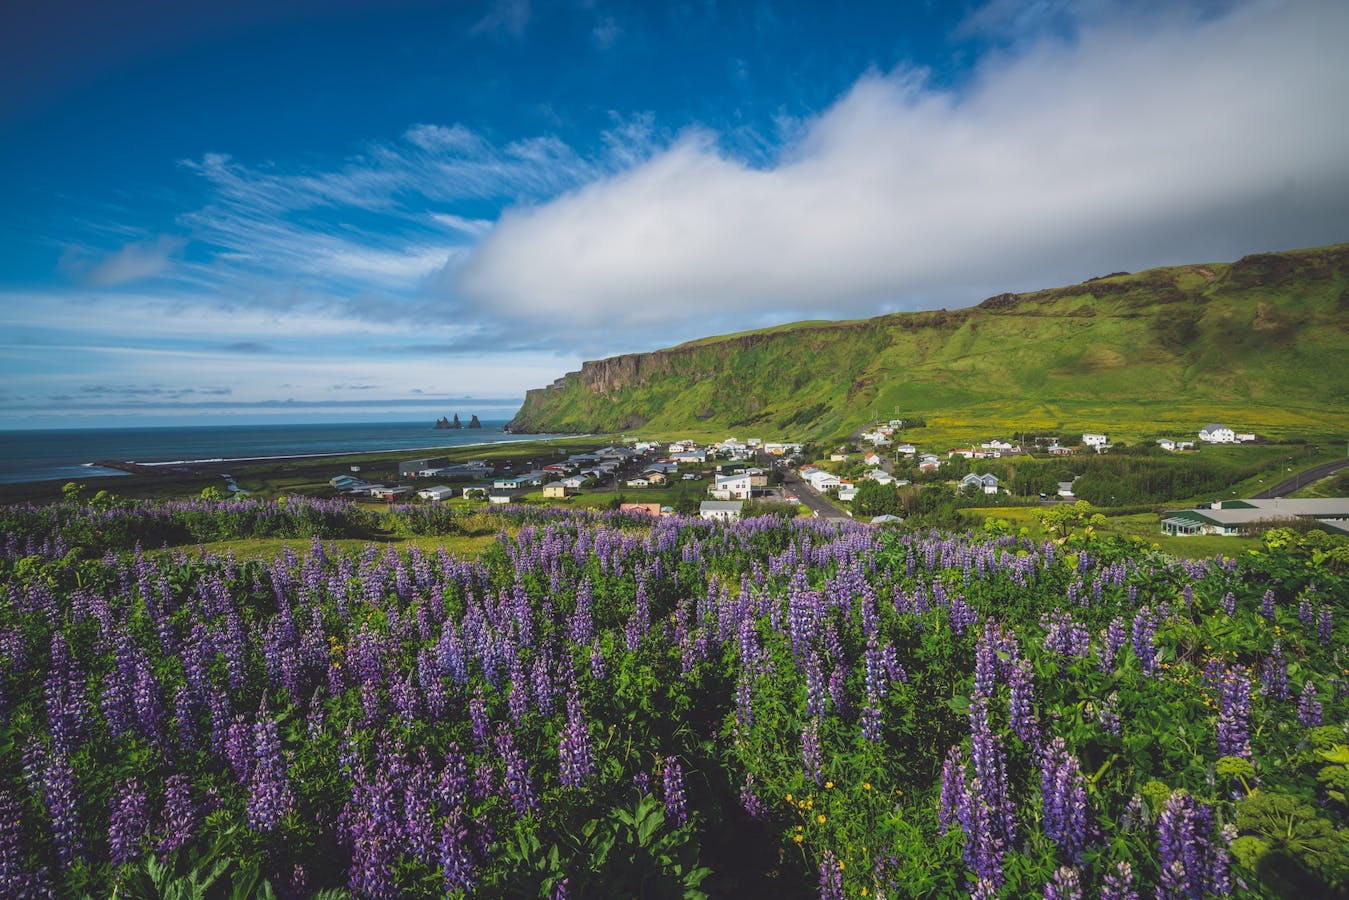 Summer in Iceland with lavender fields